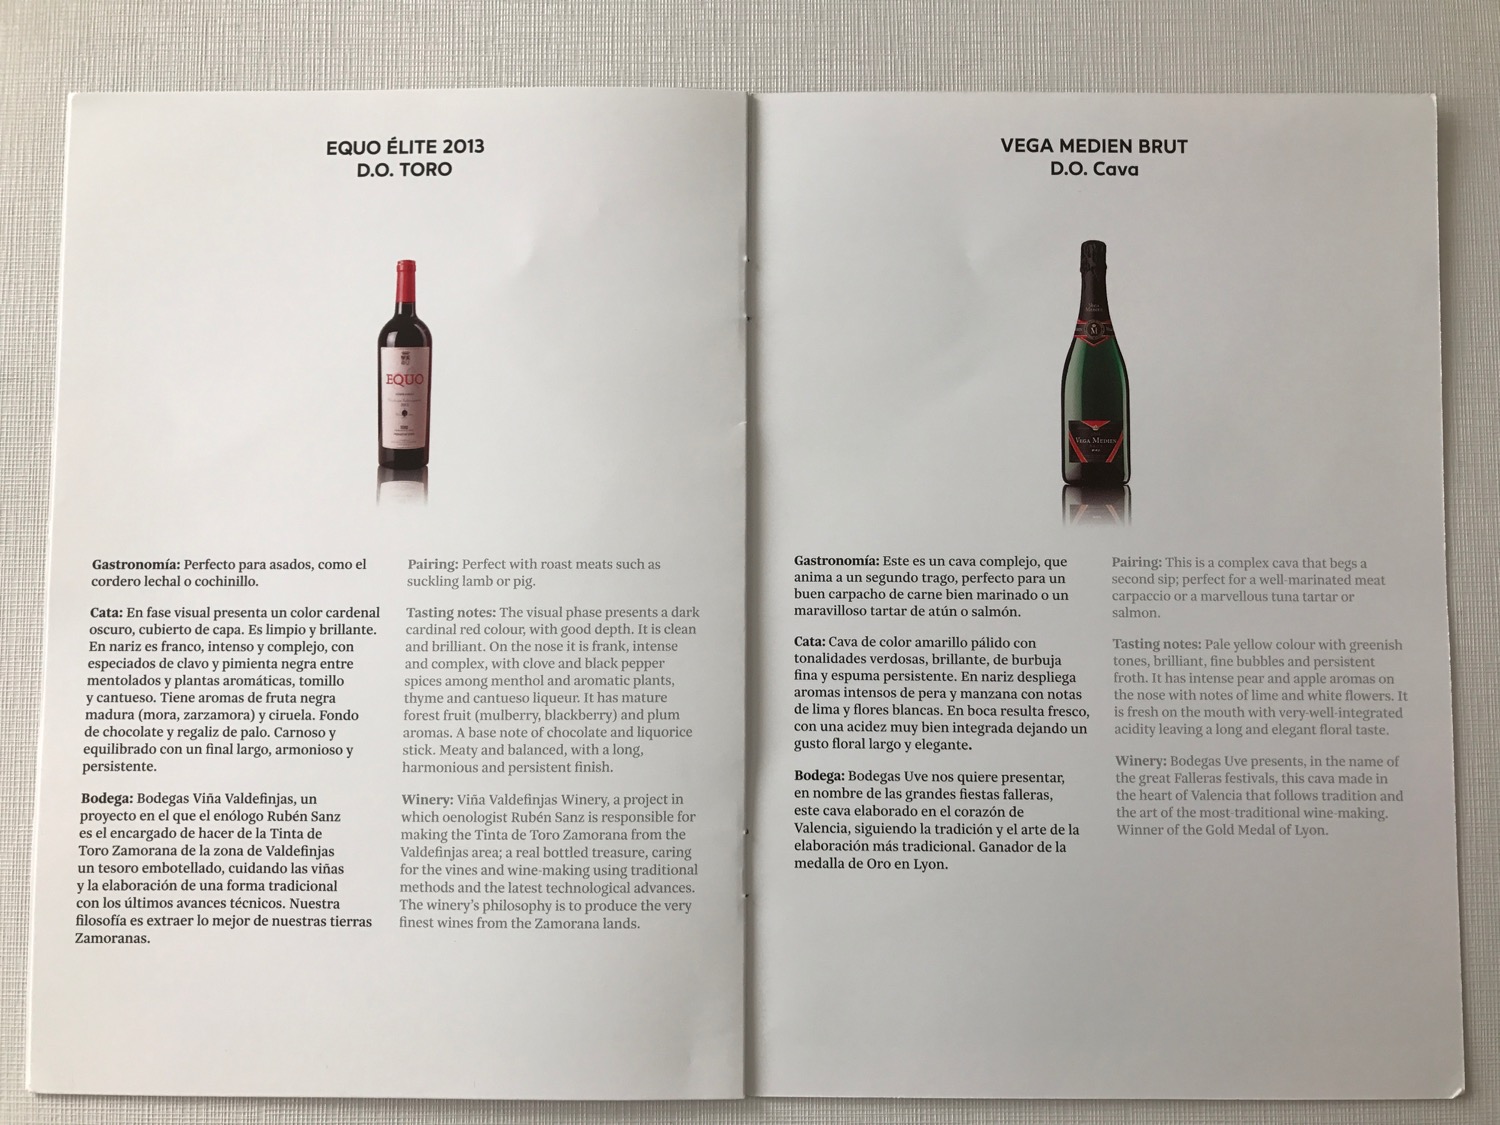 a white paper with text and images of wine bottles